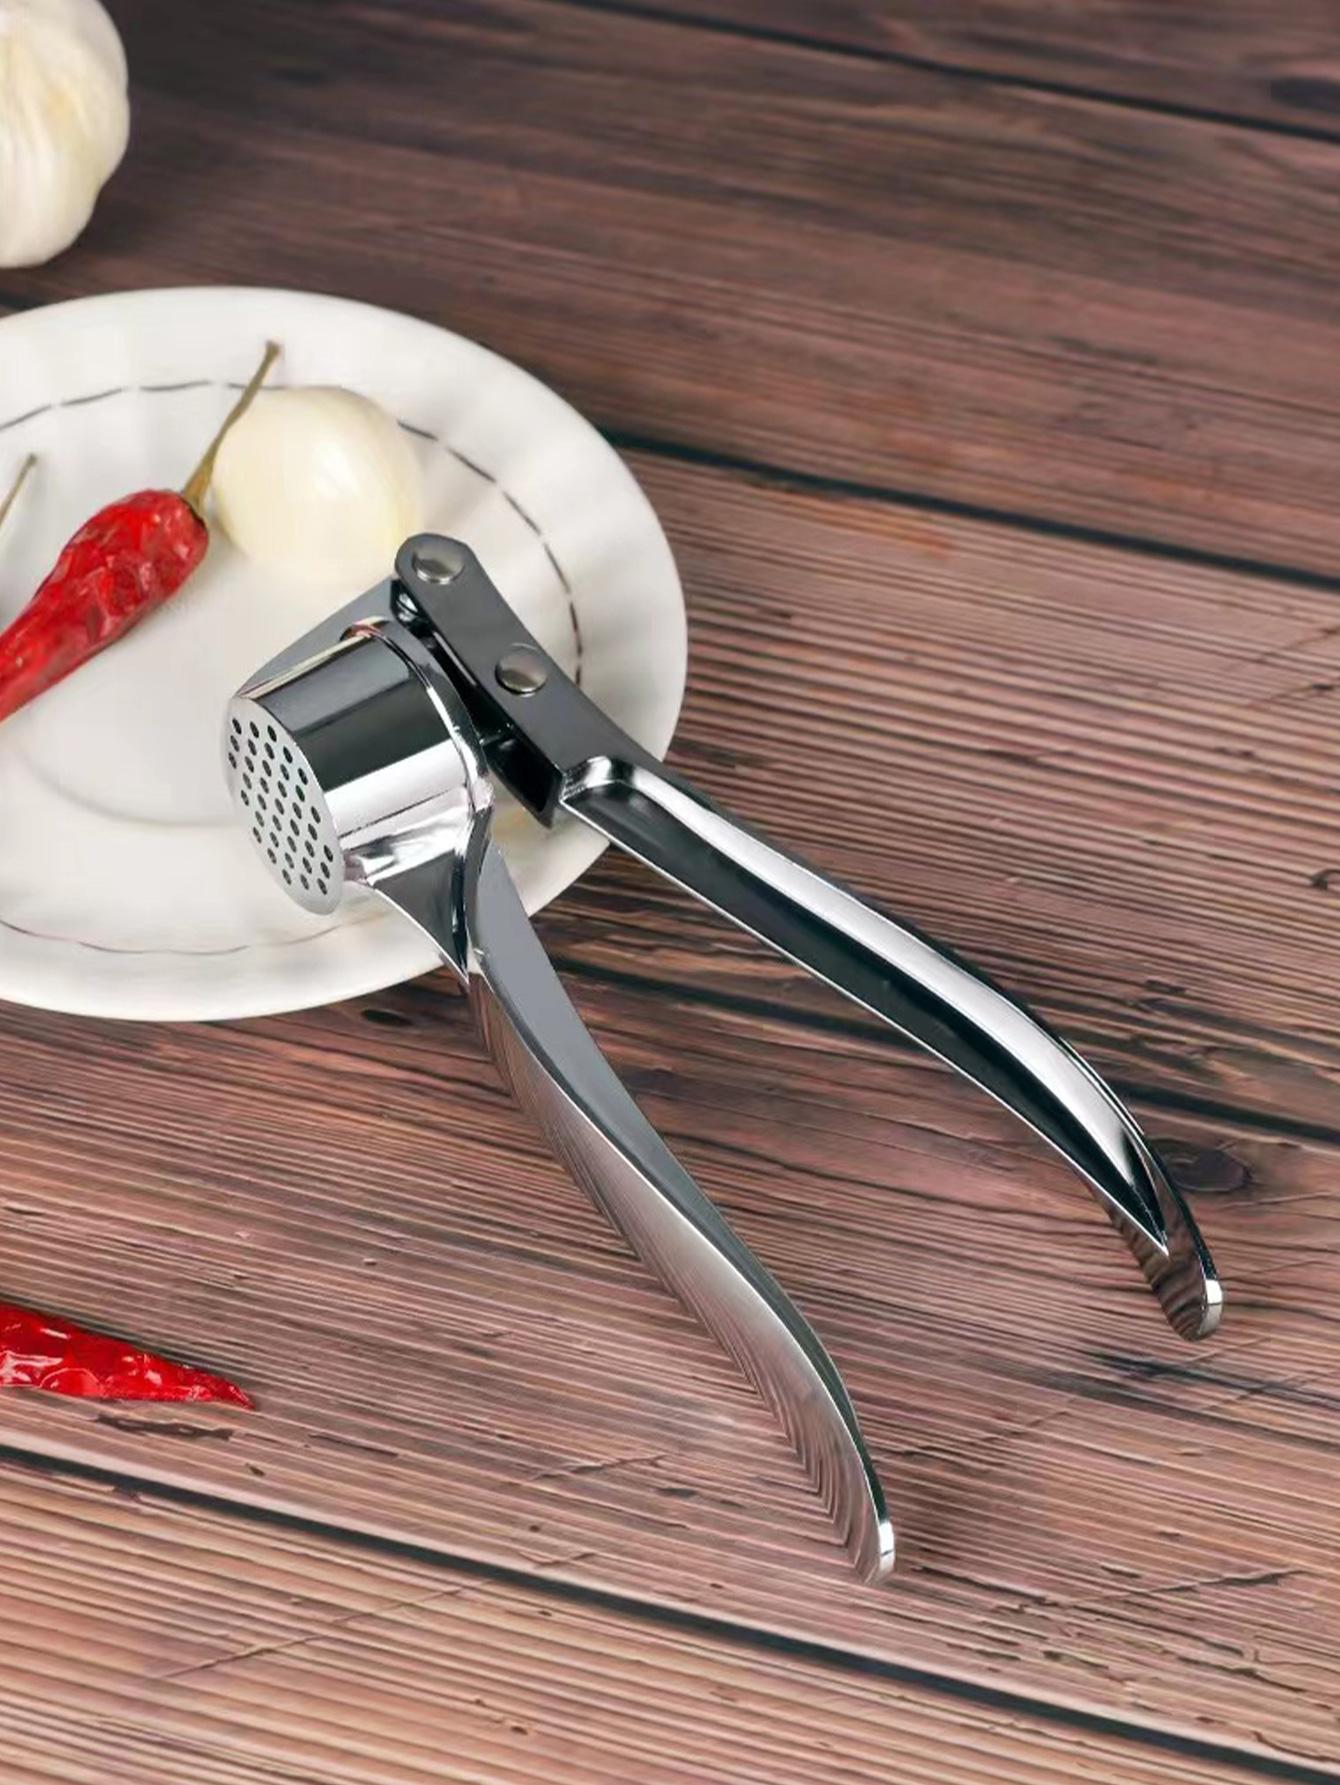 One stainless steel garlic press, a modernist silver multifunctional garlic mincer for the kitchen.